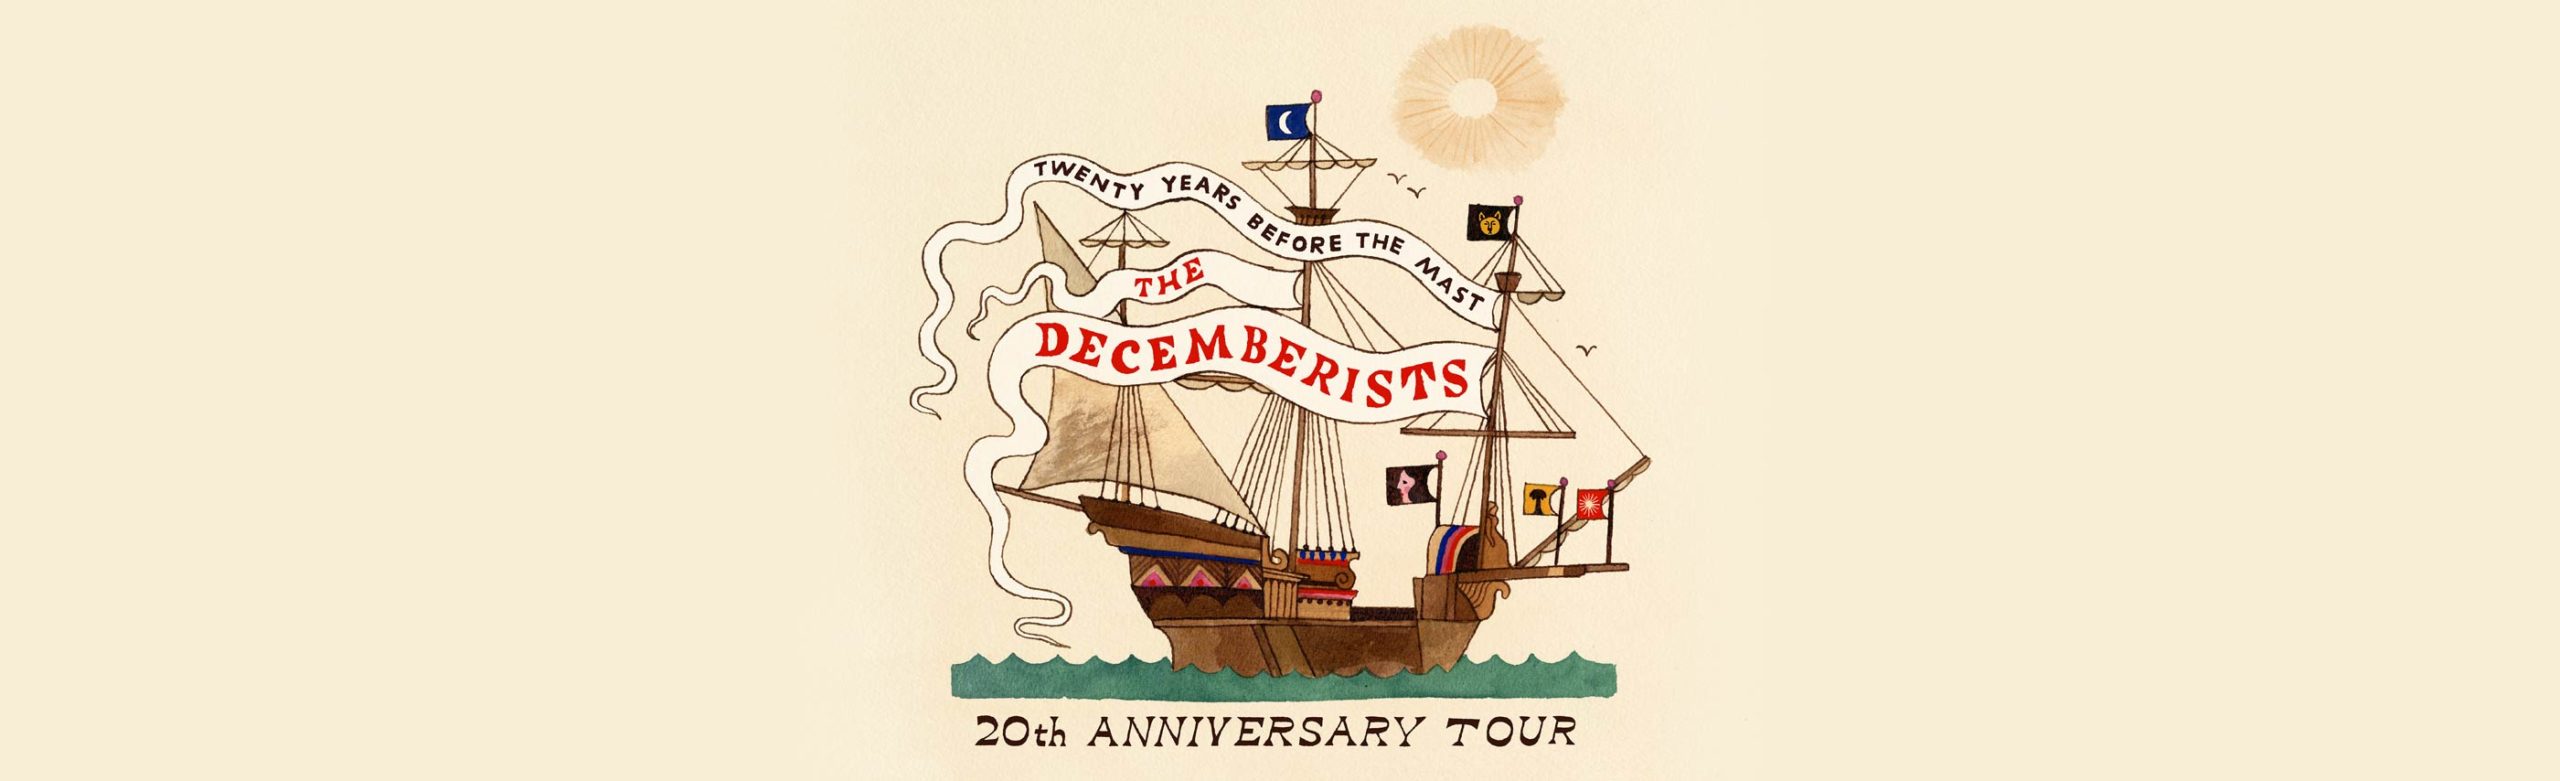 RESCHEDULED: The Decemberists: 20 Years Before The Mast